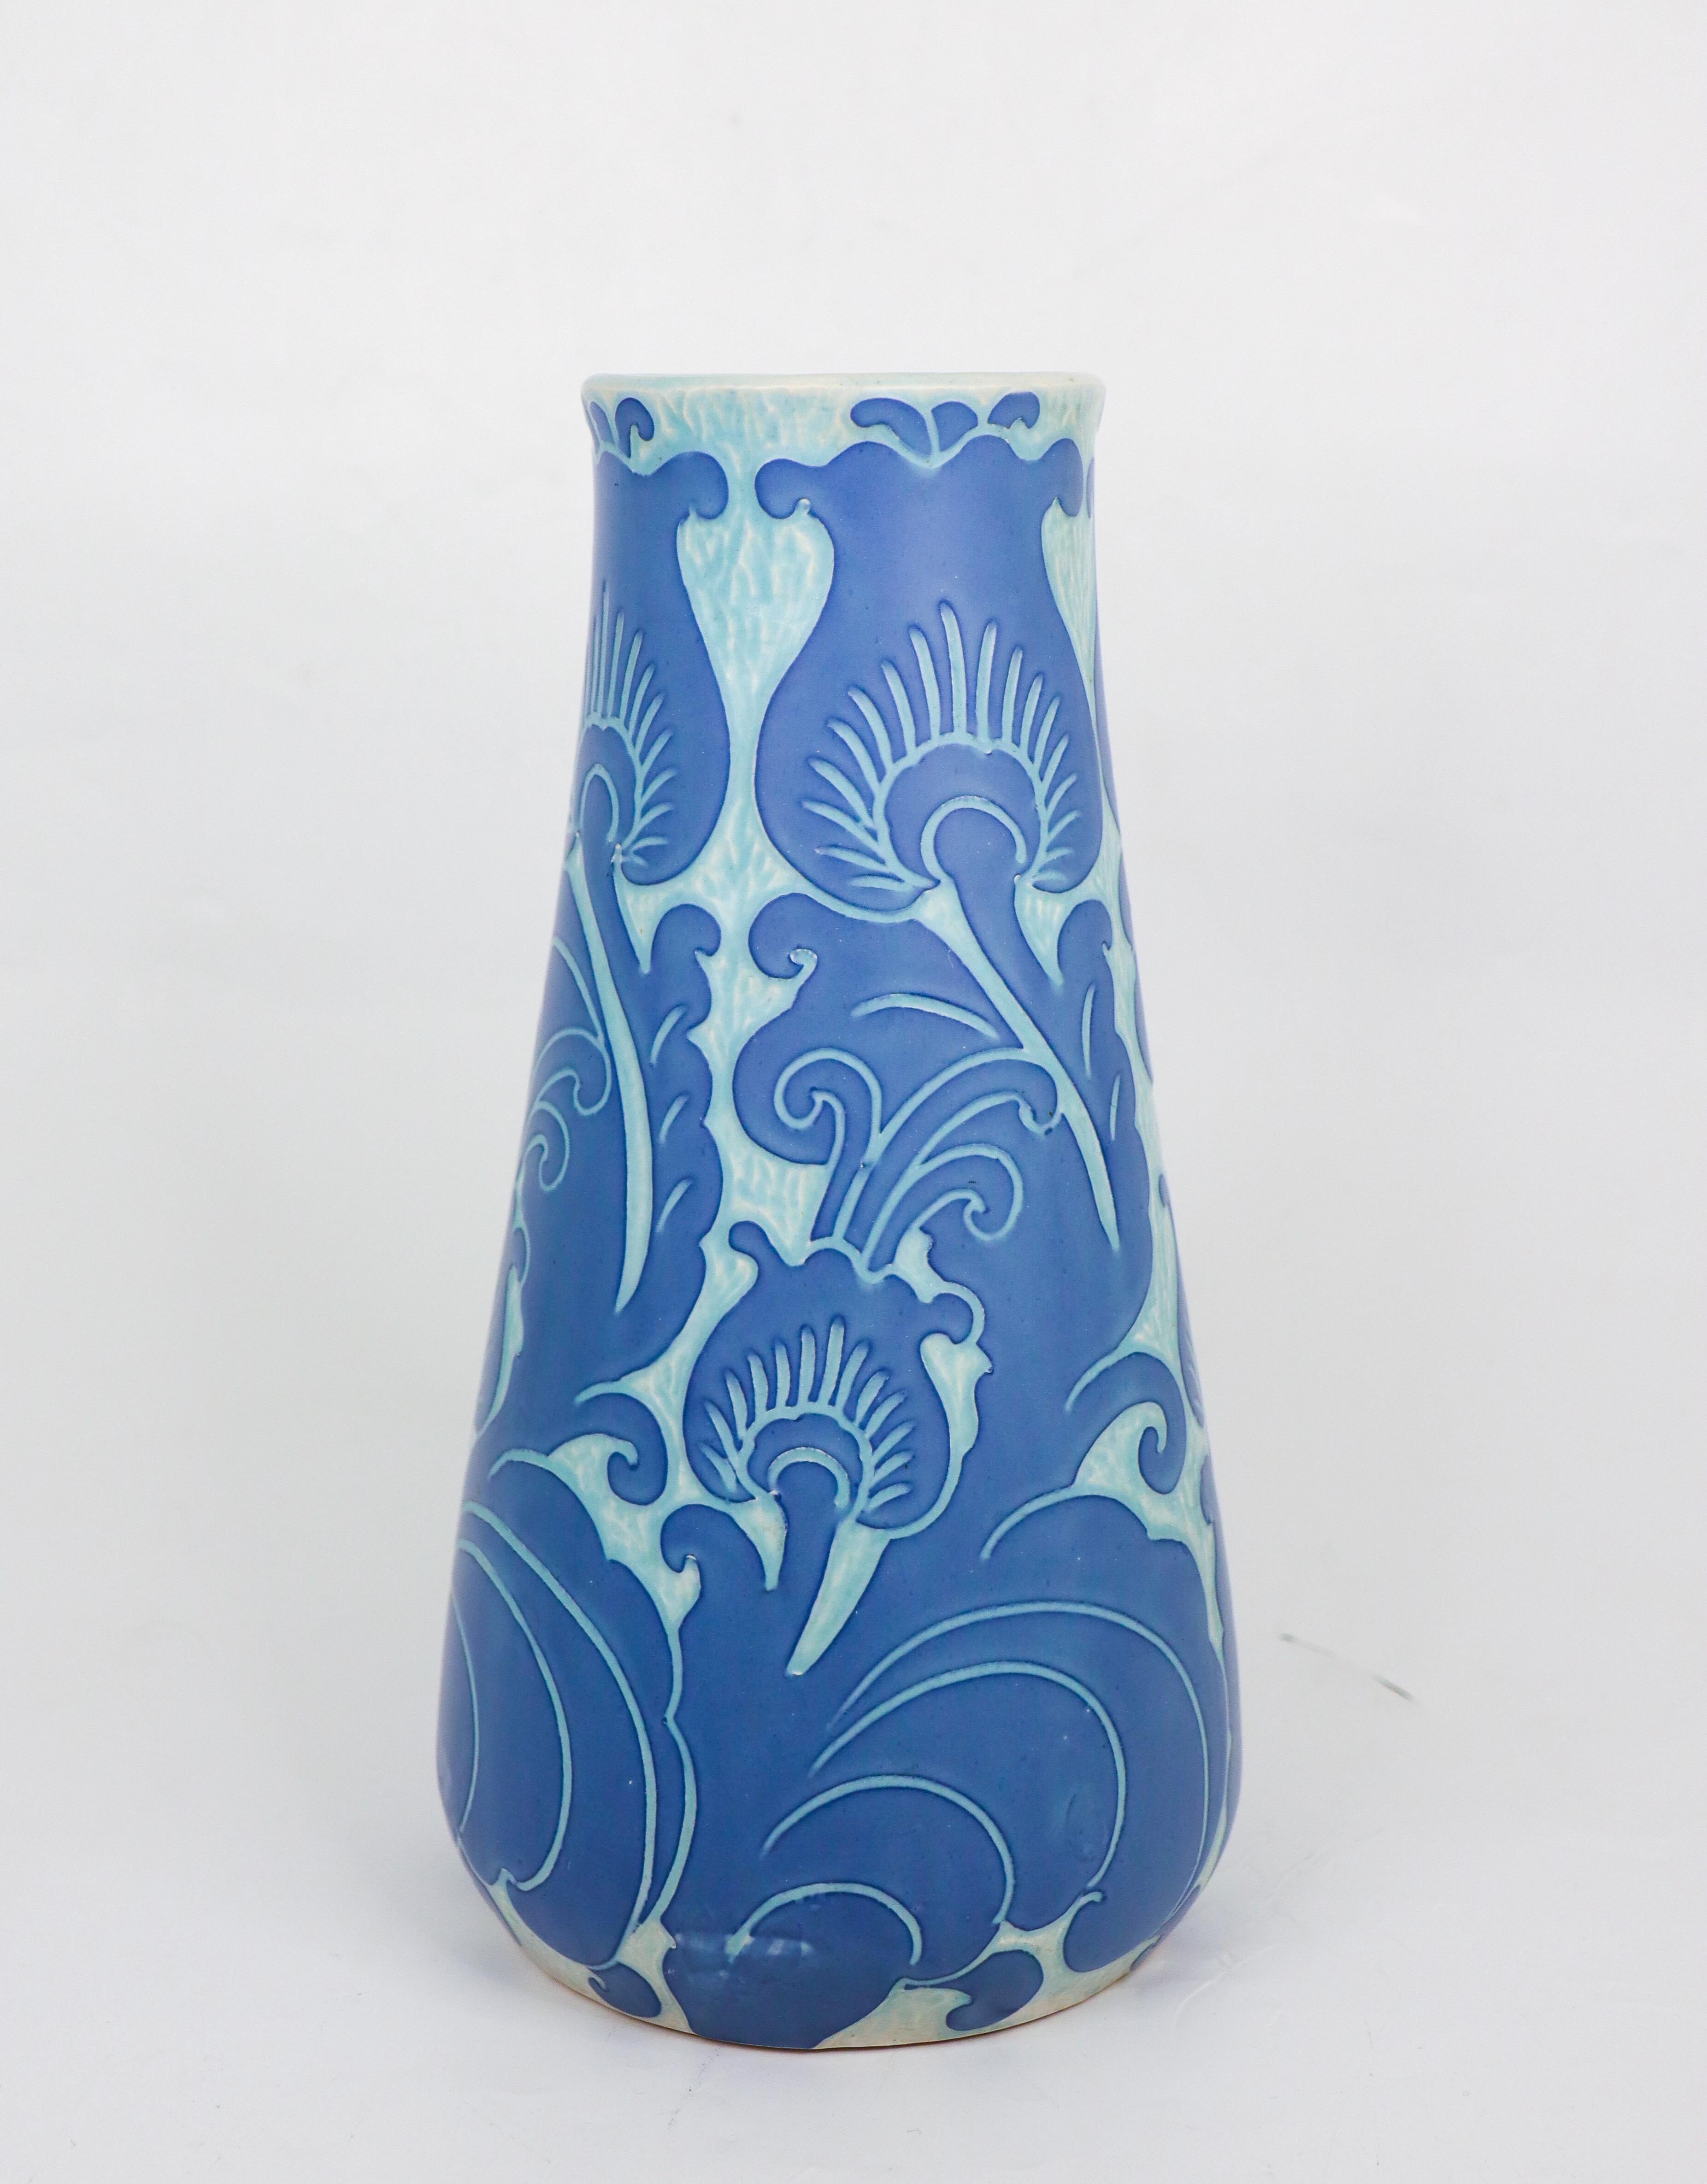 An art nouveau vase in ceramics designed by Josef Ekberg at Gustavsberg in 1919, this vase is from the classic Sgrafitto-serie. The vase is 27.5 cm (11